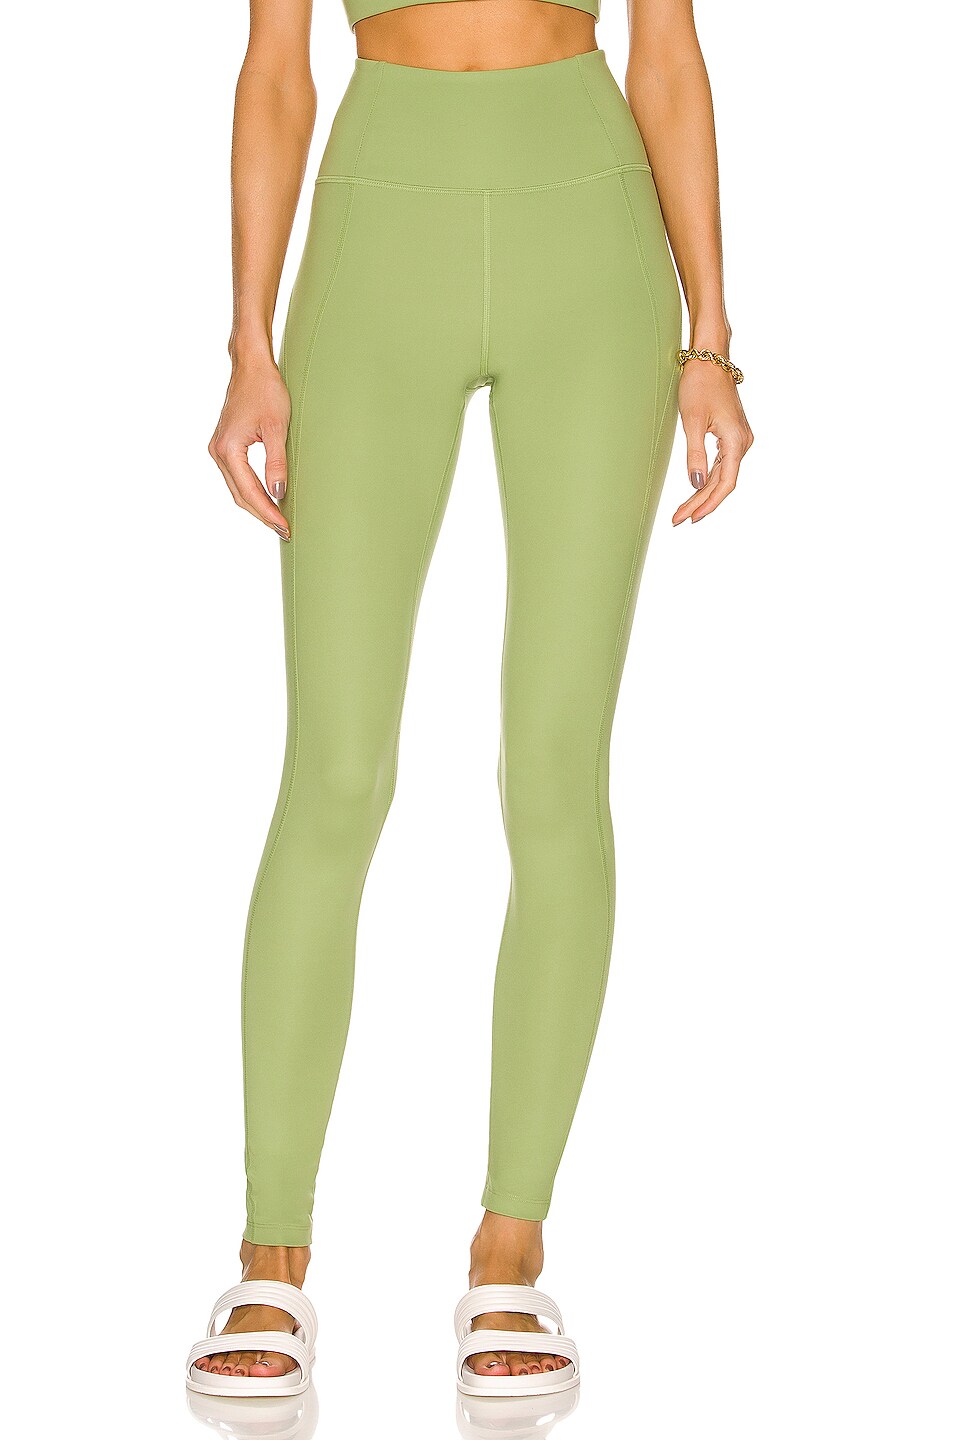 Image 1 of Girlfriend Collective High Rise Compressive Legging in Mantis